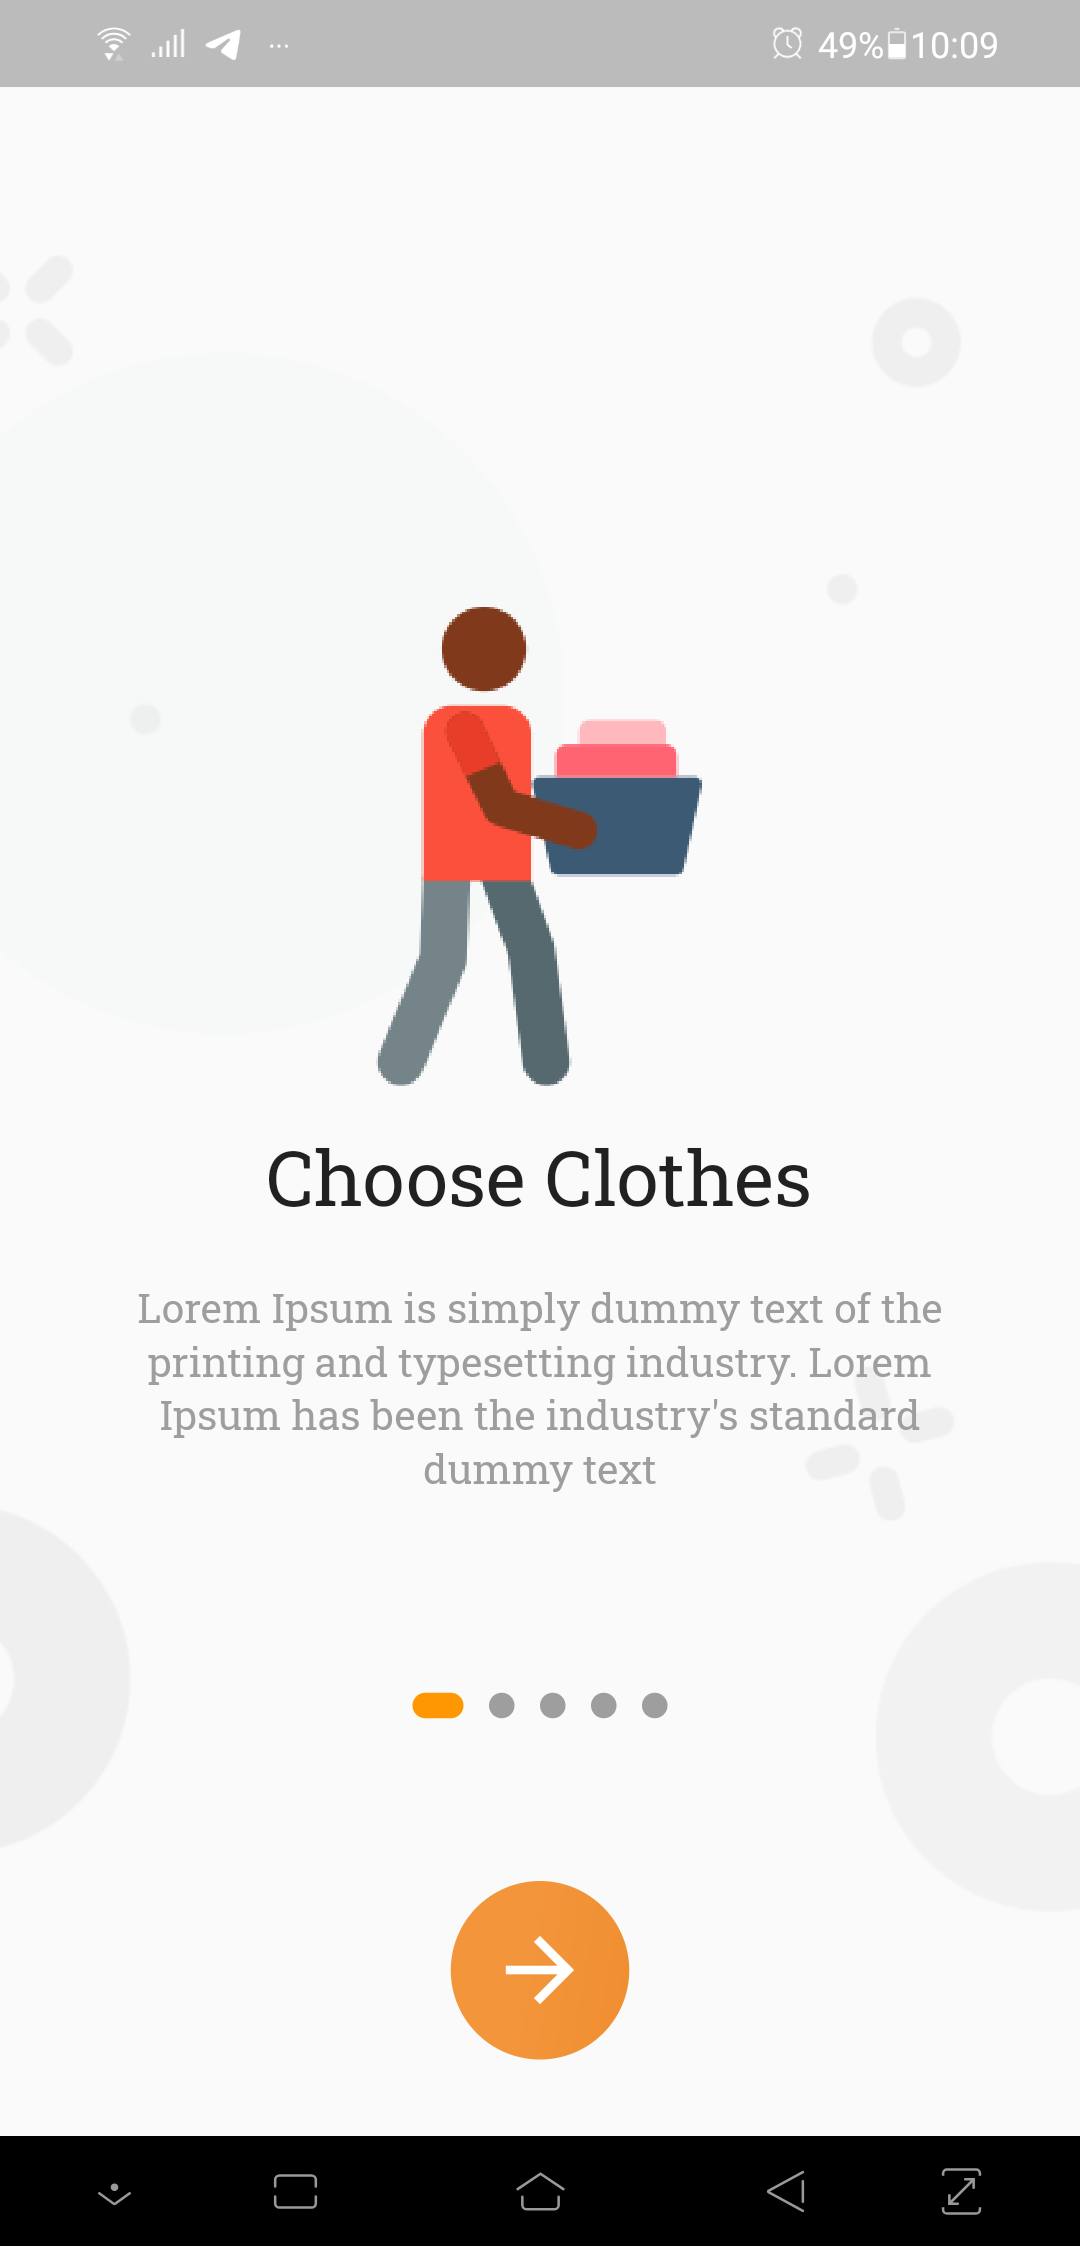 An android cloth ironing user interface built in flutter